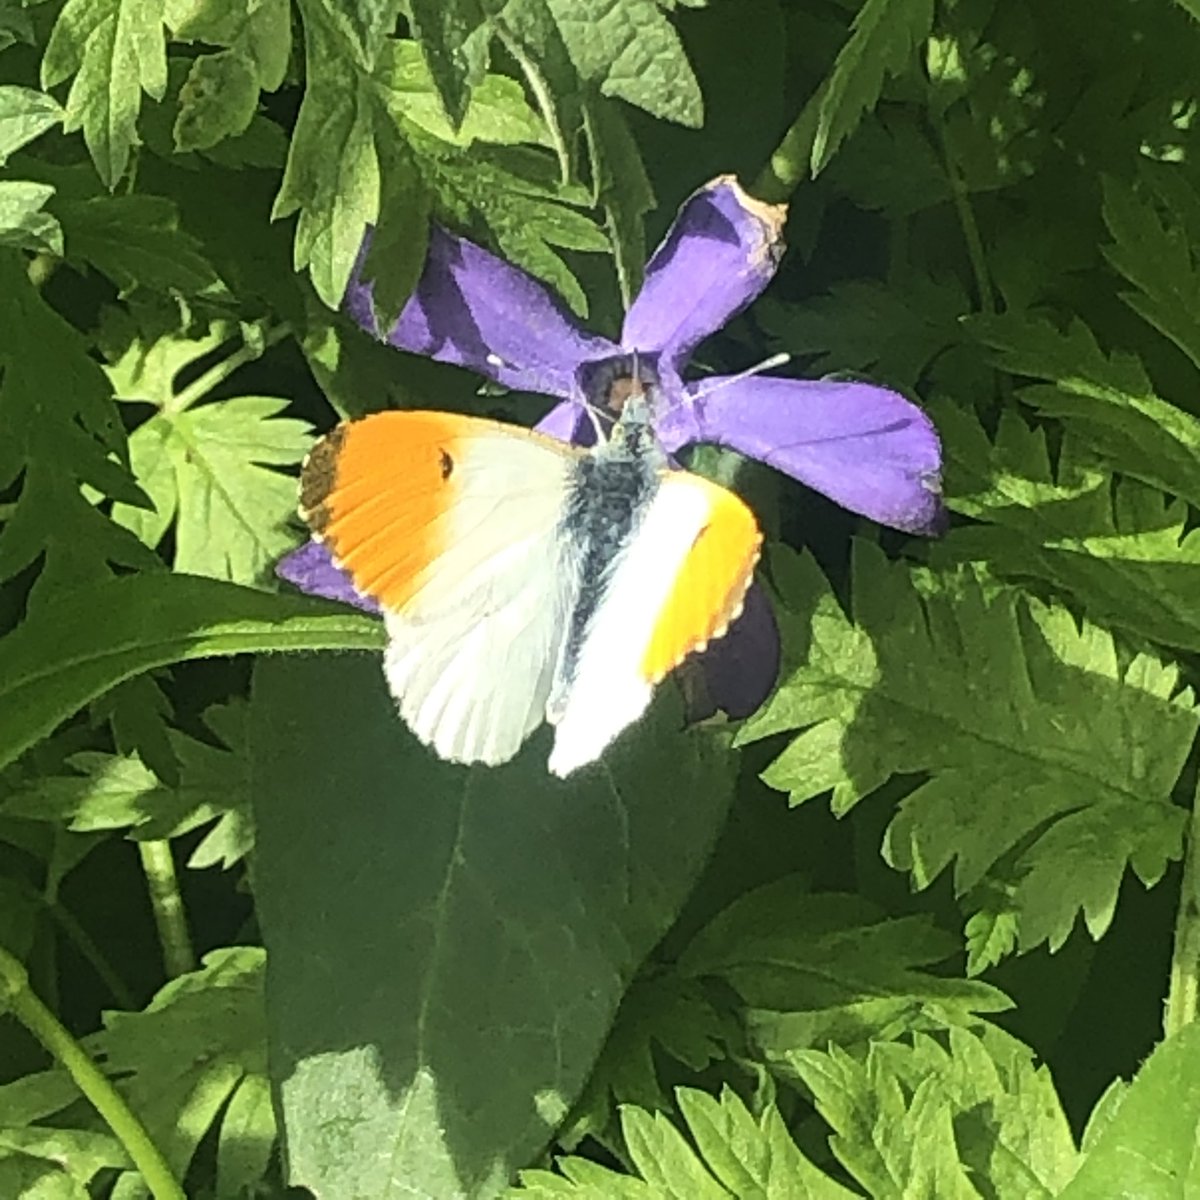 Pleased to have reached 100 butterfly records despite the weather My top 3 of 2024 so far are: 🦋 orange tip 🦋 speckled wood 🦋brimstone Really enjoy being part of a community of citizen scientists adding sightings to the @savebutterflies and @UK_CEH iRecord butterfly app